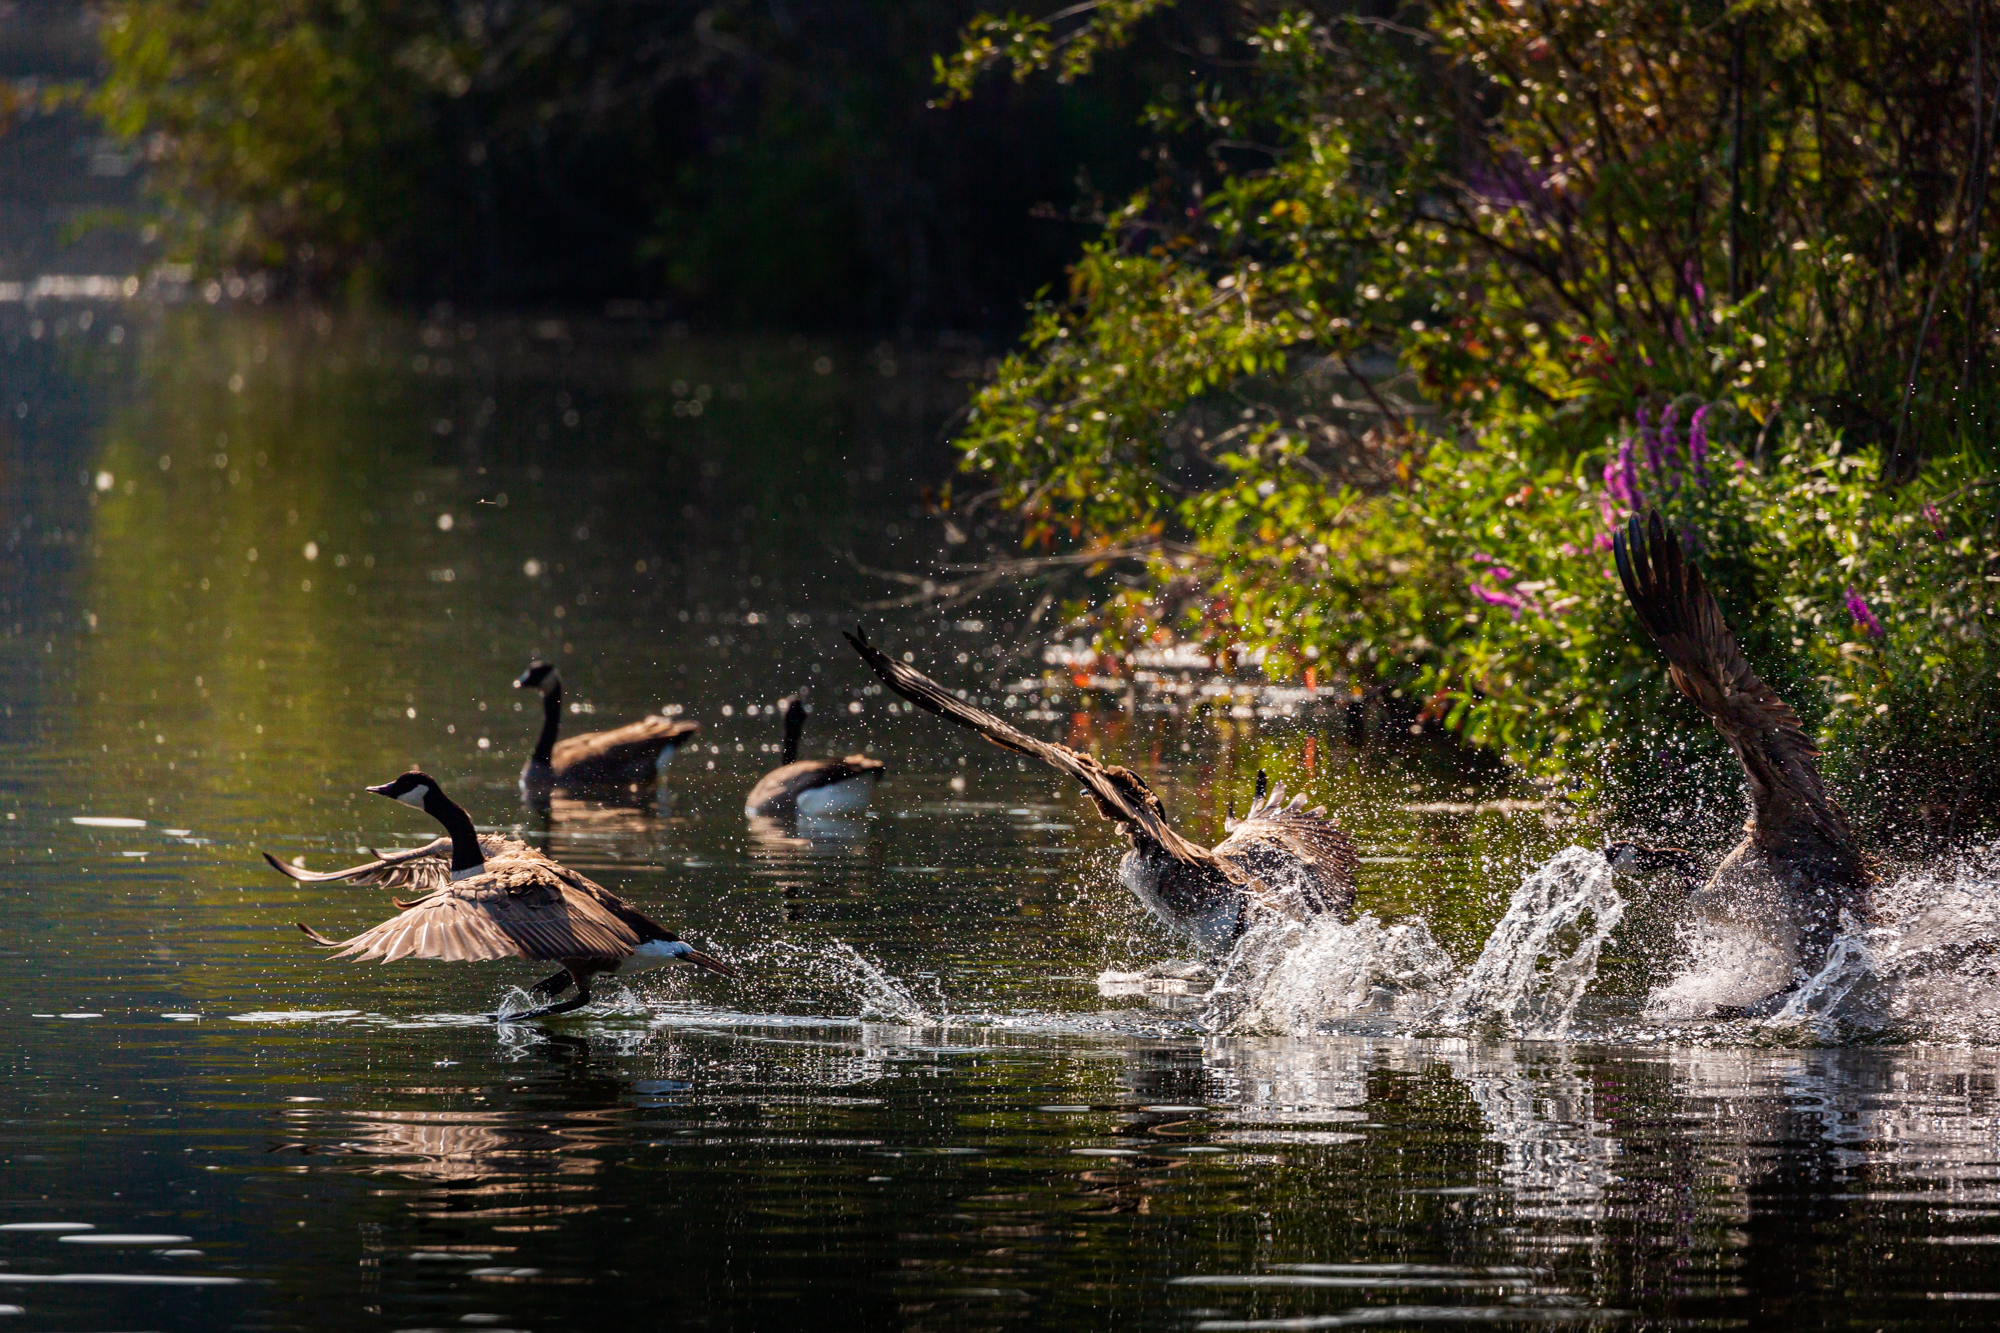 The three geese continue to chase each other in the pond. There are two other geese visible in the background.